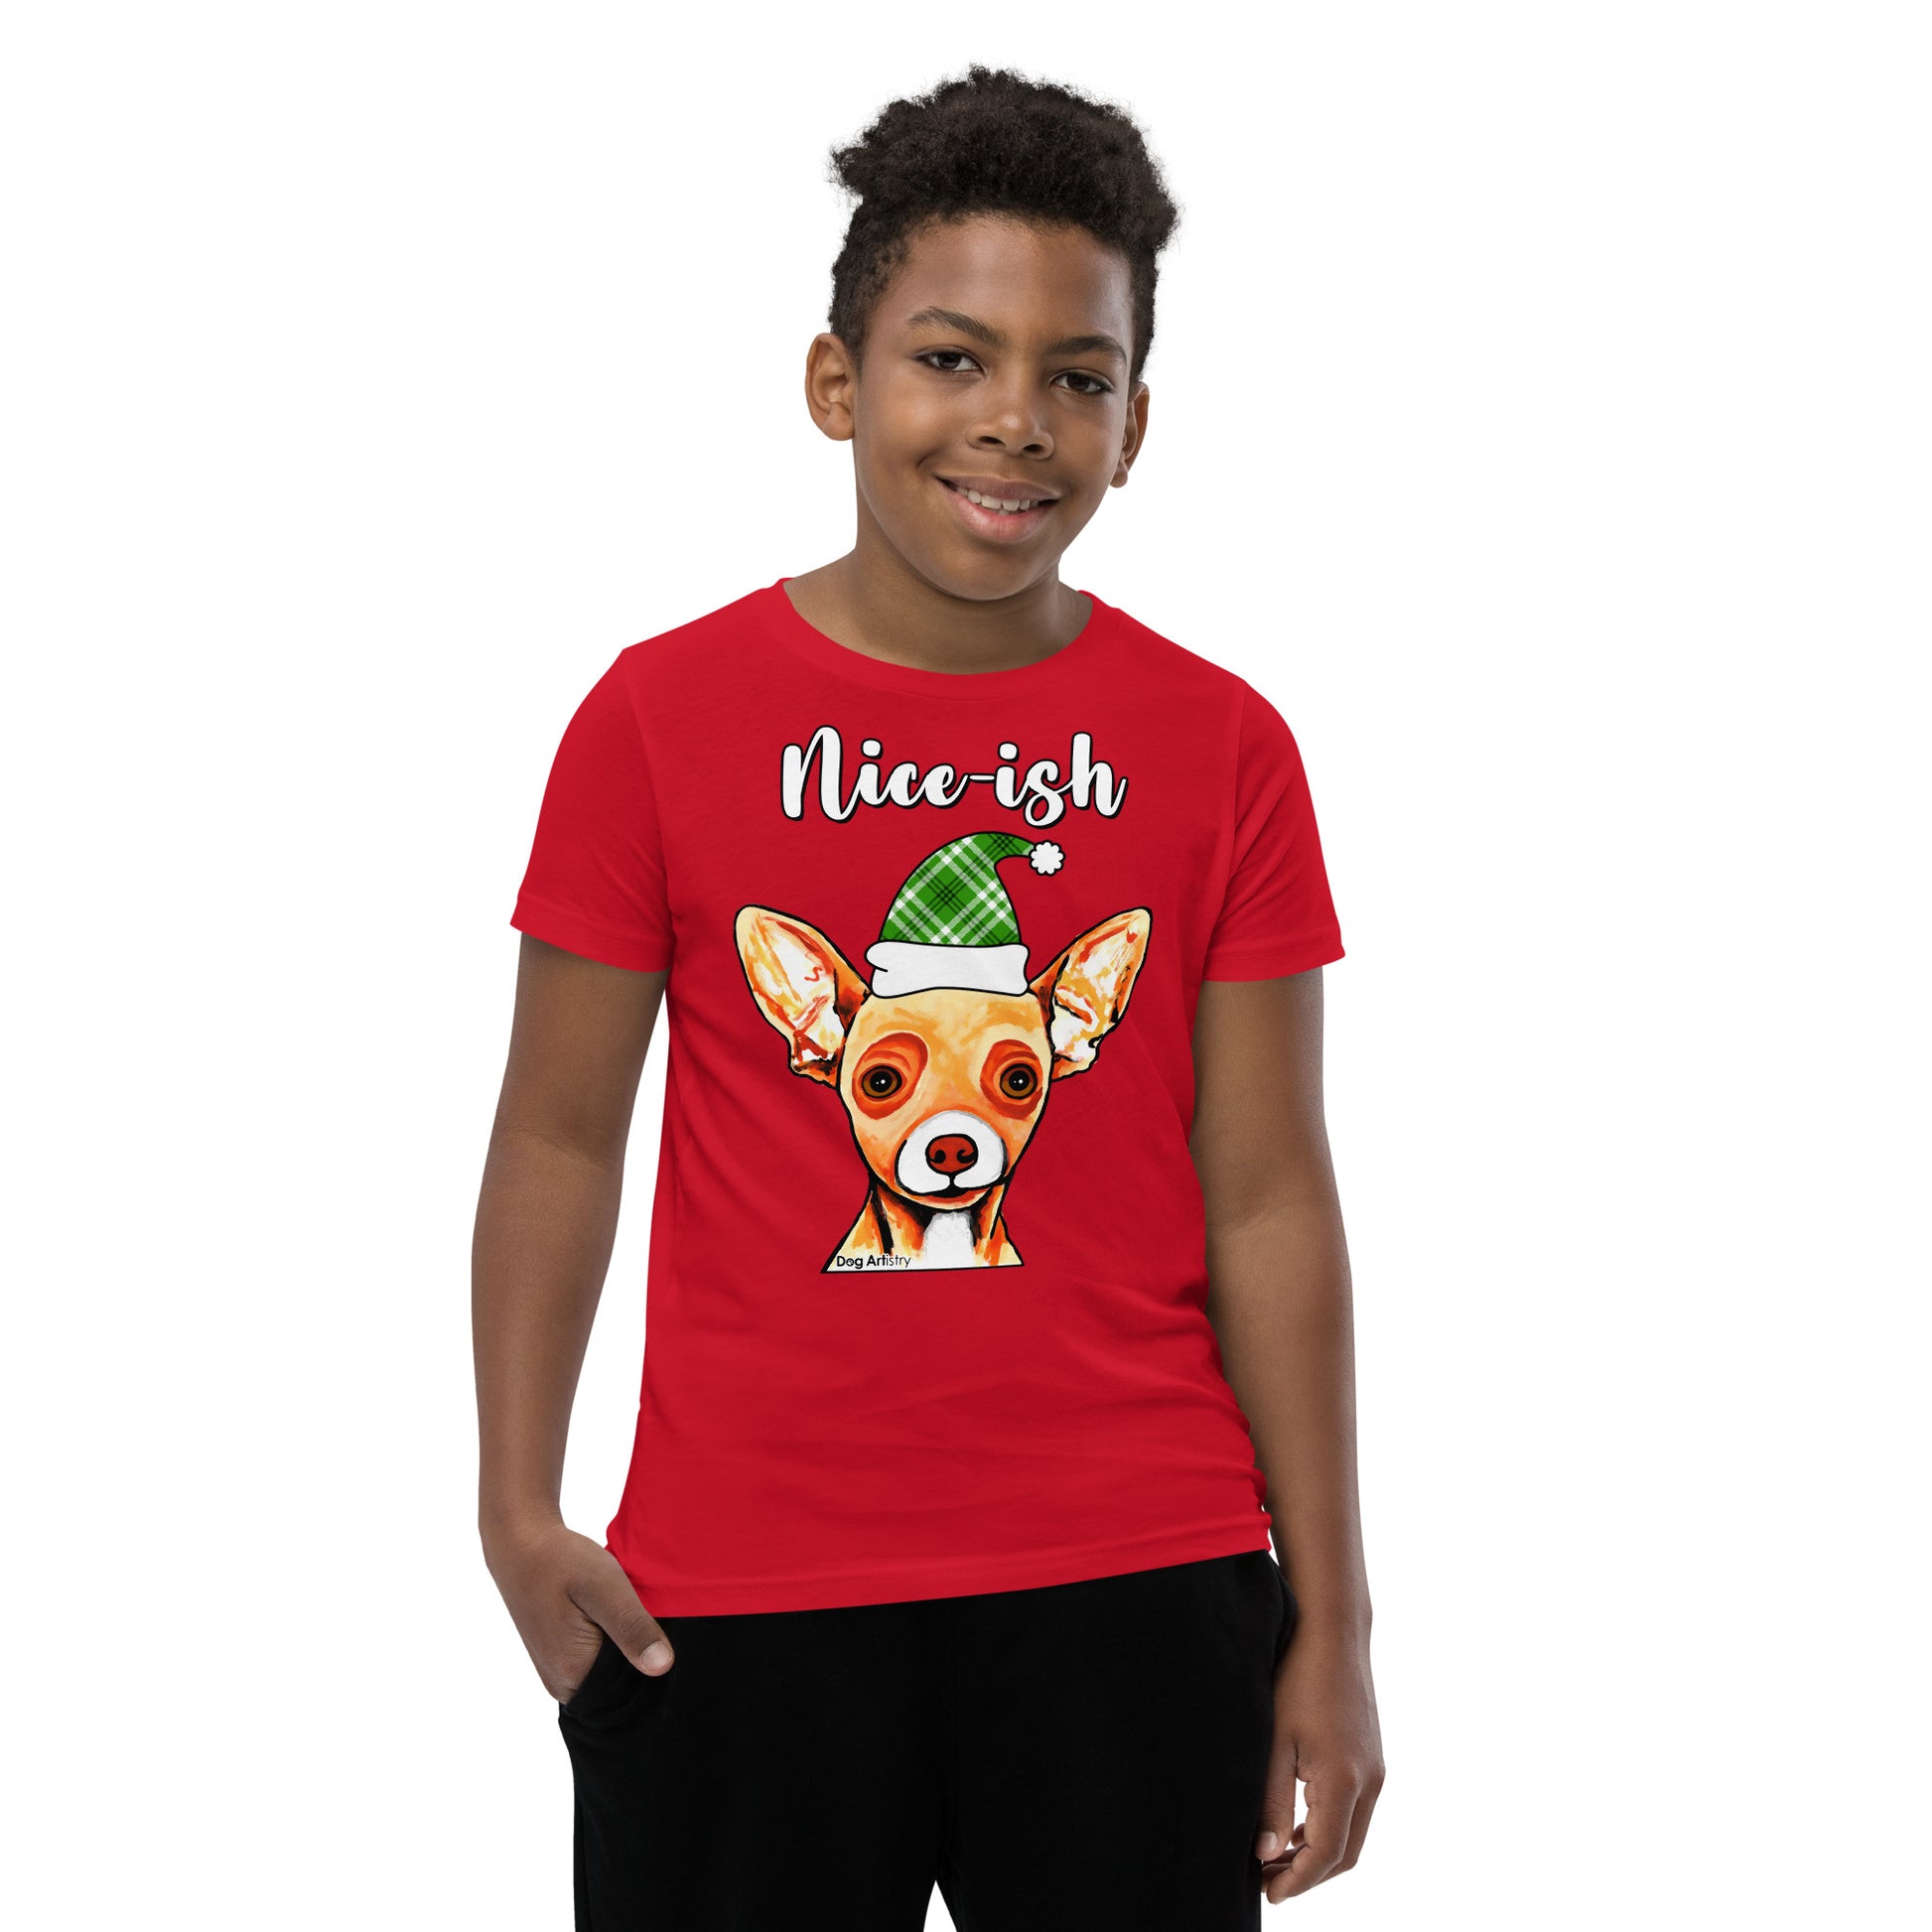 Nice-Ish Chihuahua Holiday youth t-shirt red by Dog Artistry.